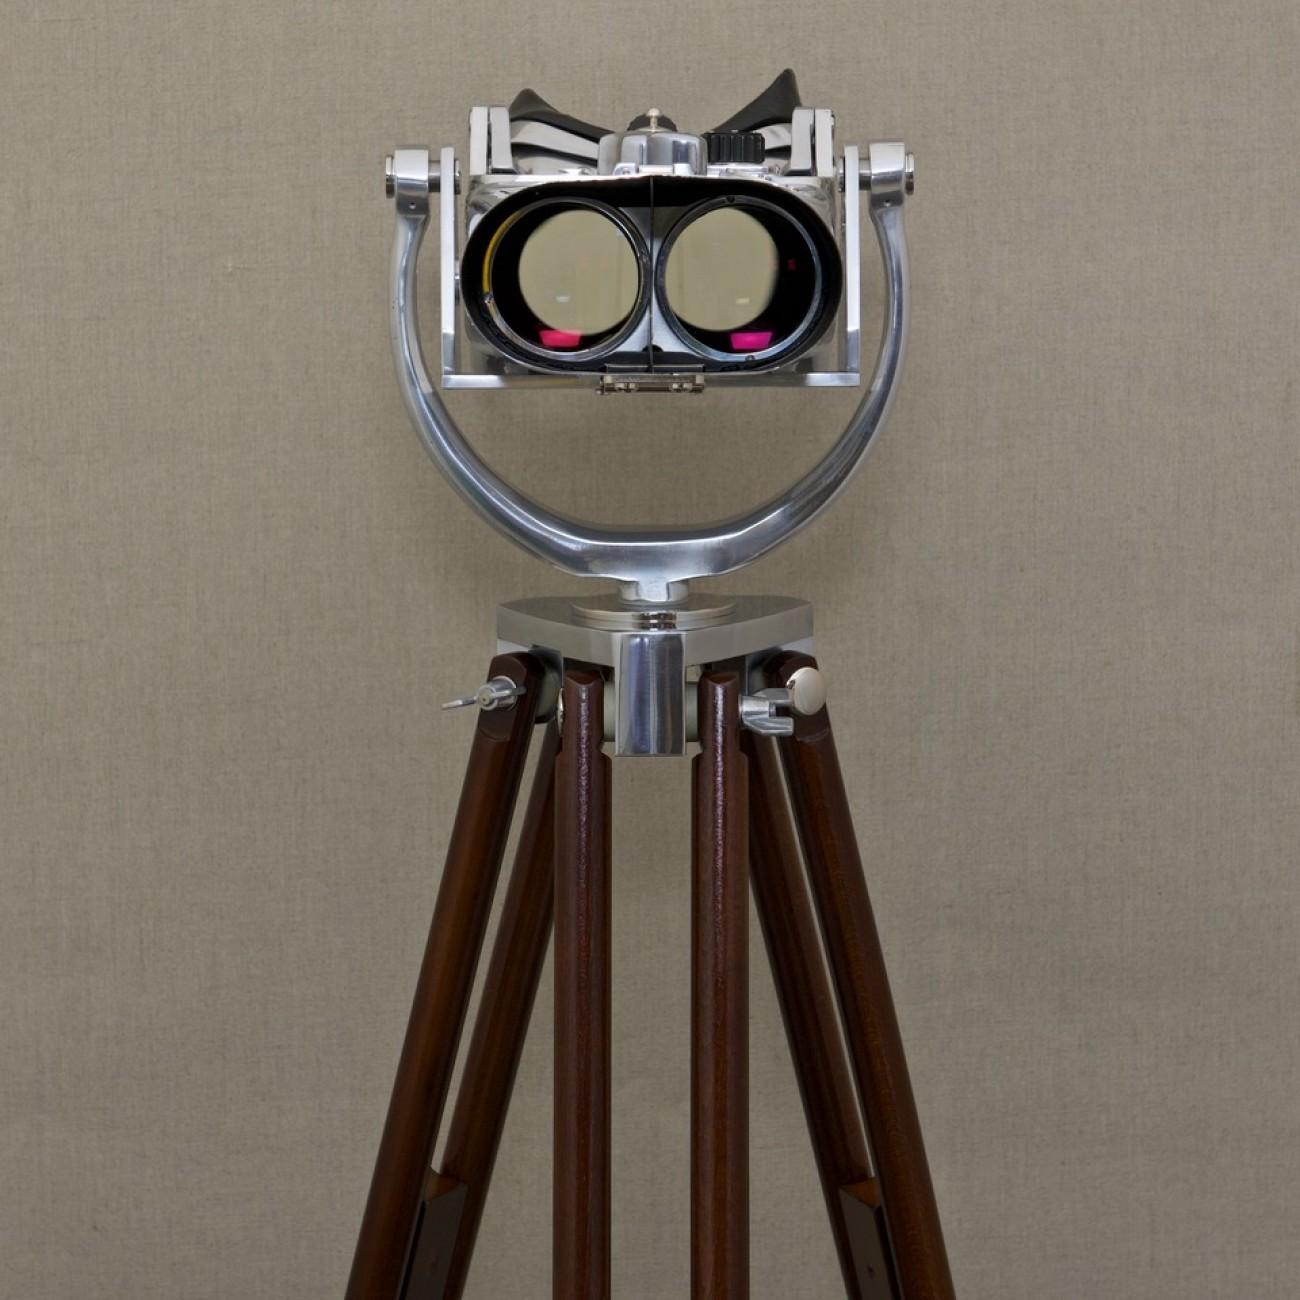 Superb World War II 12 x 60 (12 power magnification and 60 mm objective lenses) double telescope binocular by Carl Zeiss of Jena. A successful design used frequently on anti-aircraft range finders, typically in groups of three - two for the aimers